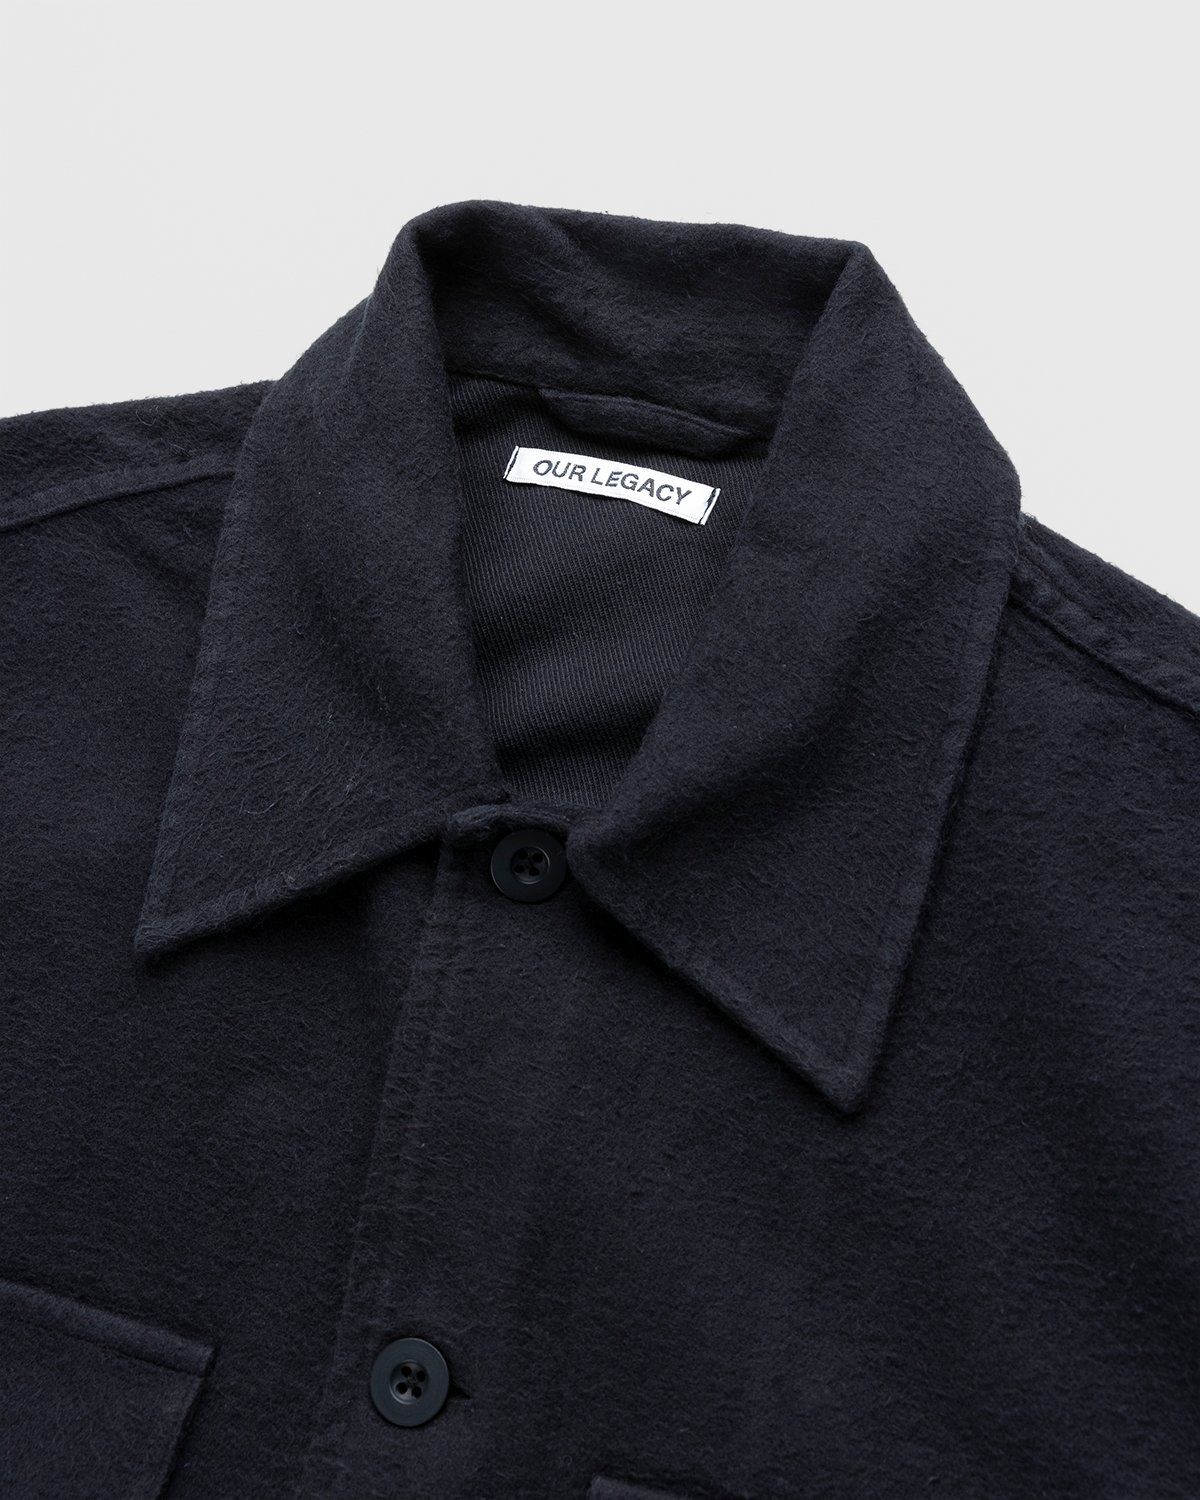 Our Legacy – Evening Coach Jacket Black Brushed - Outerwear - Black - Image 3